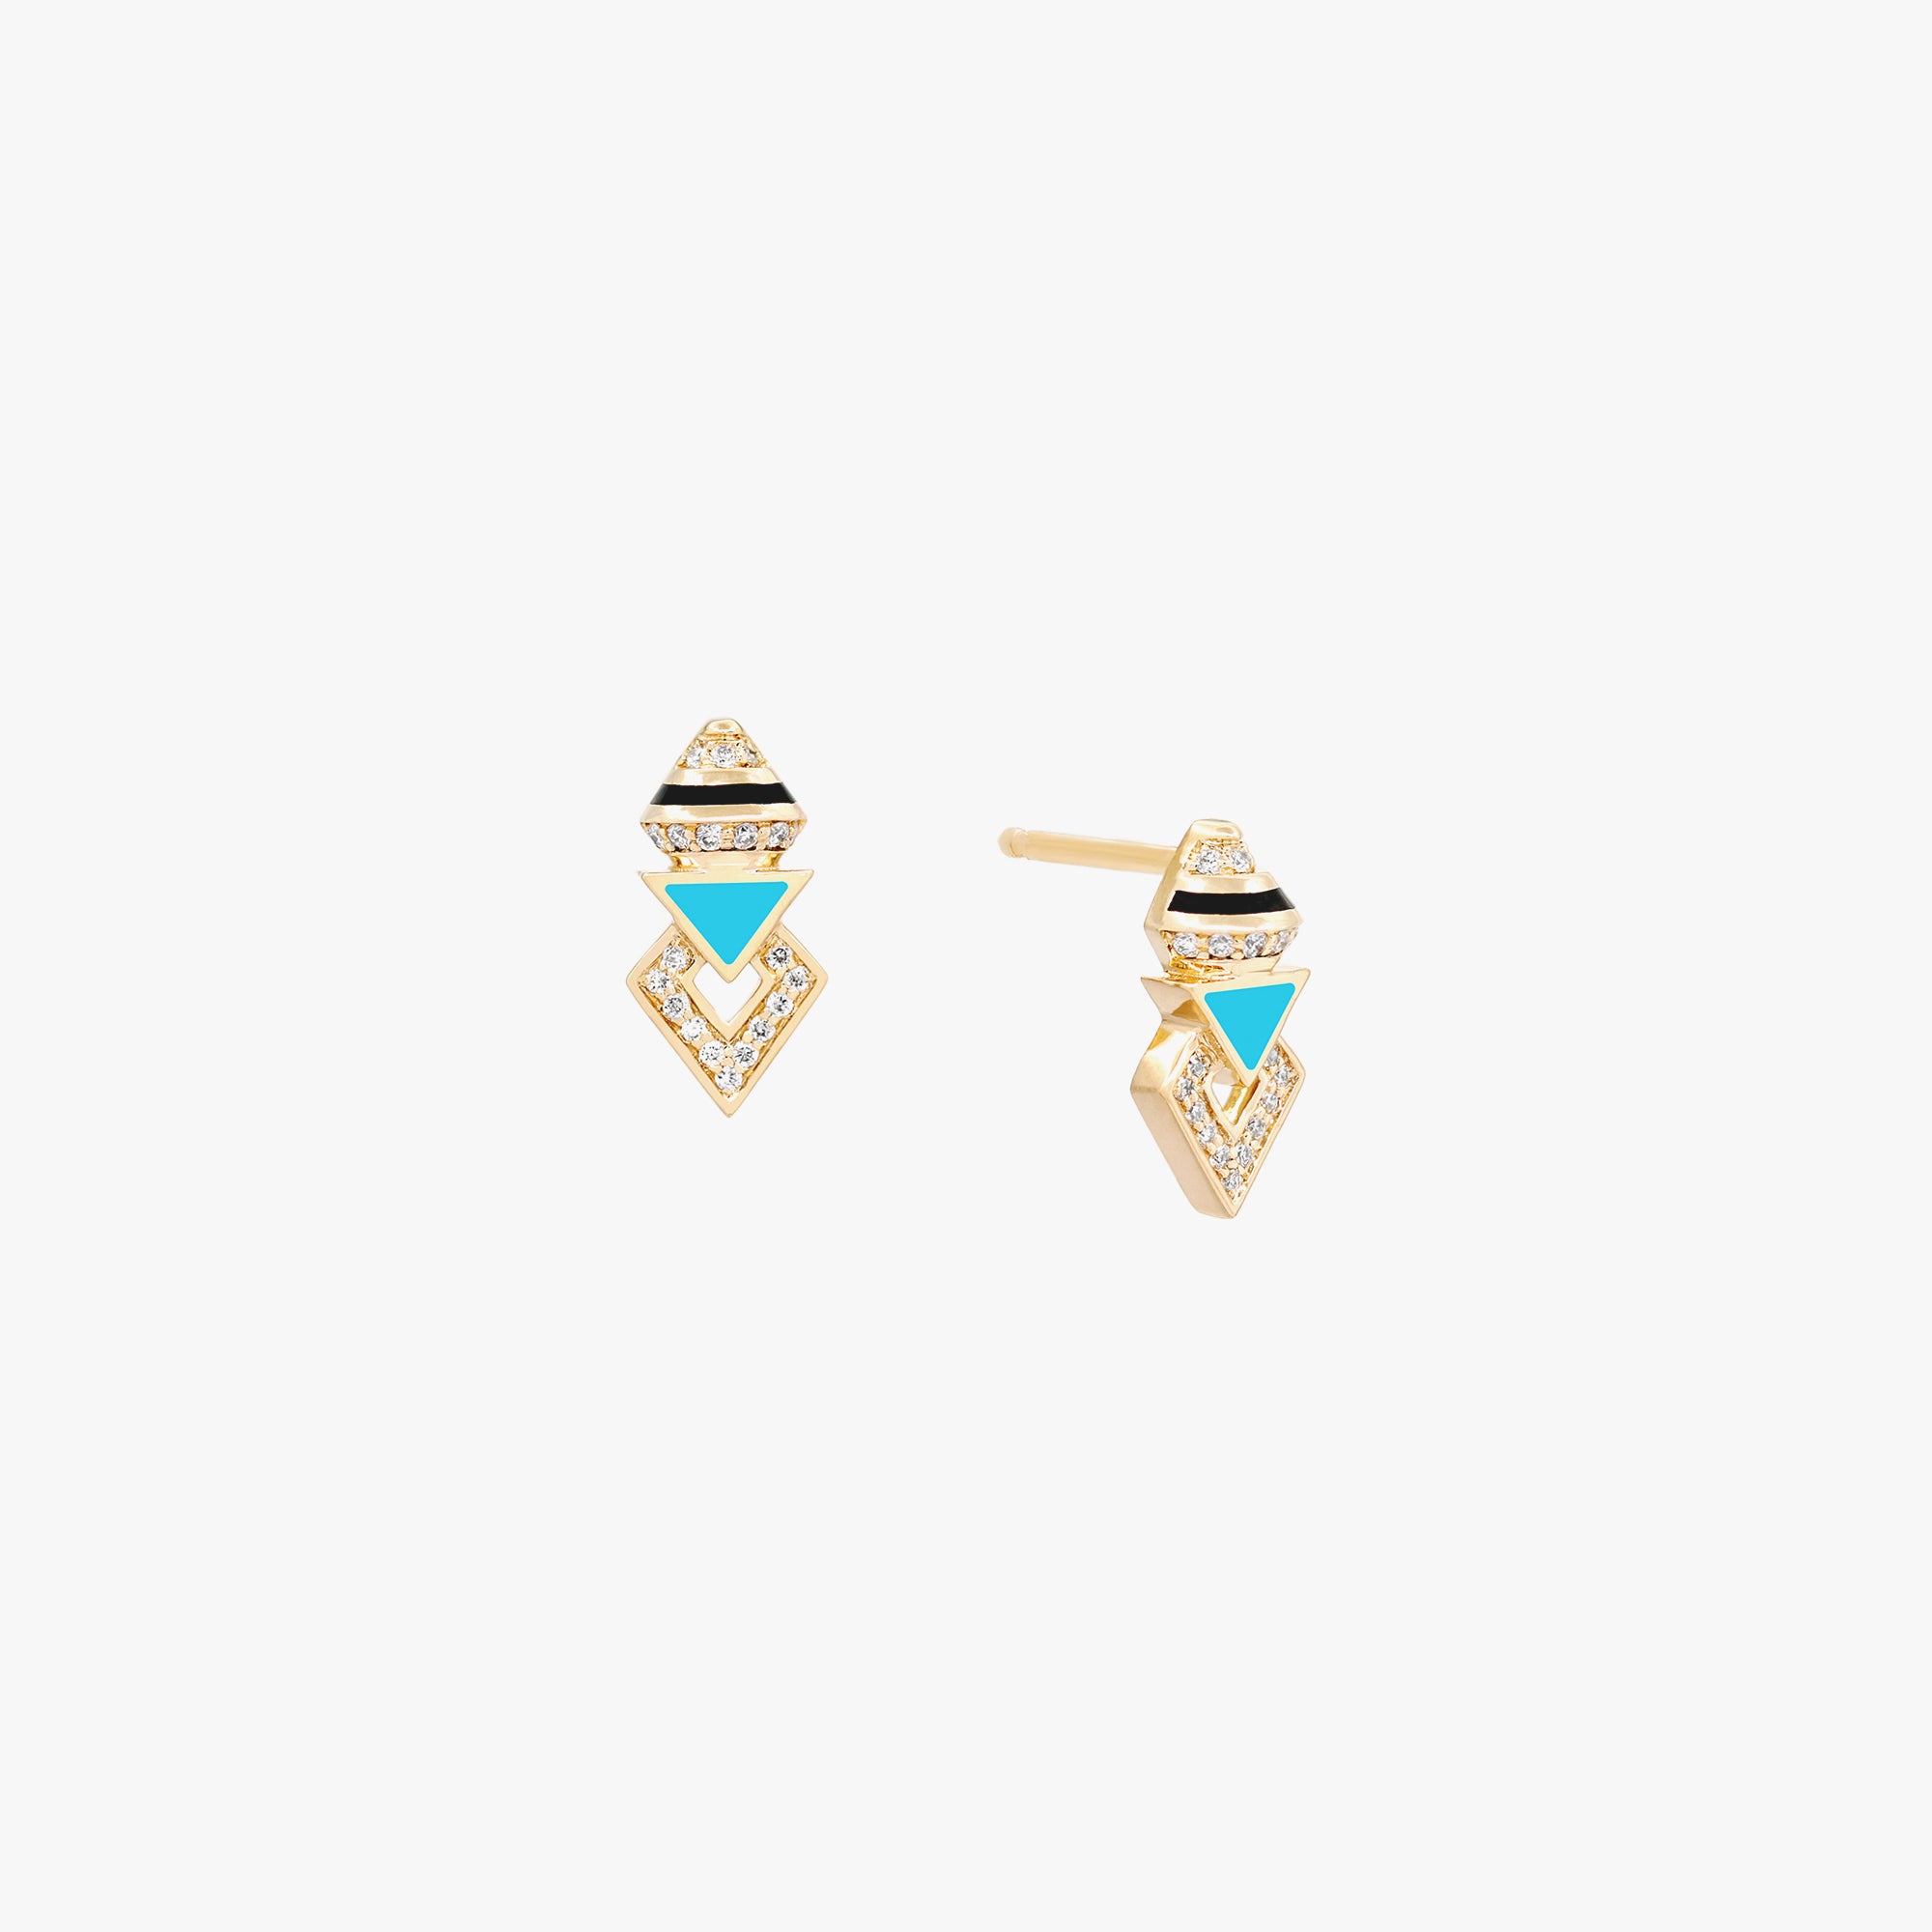 18k Yellow Gold Stud Earrings with Black & Turquoise Hyceram and Diamonds